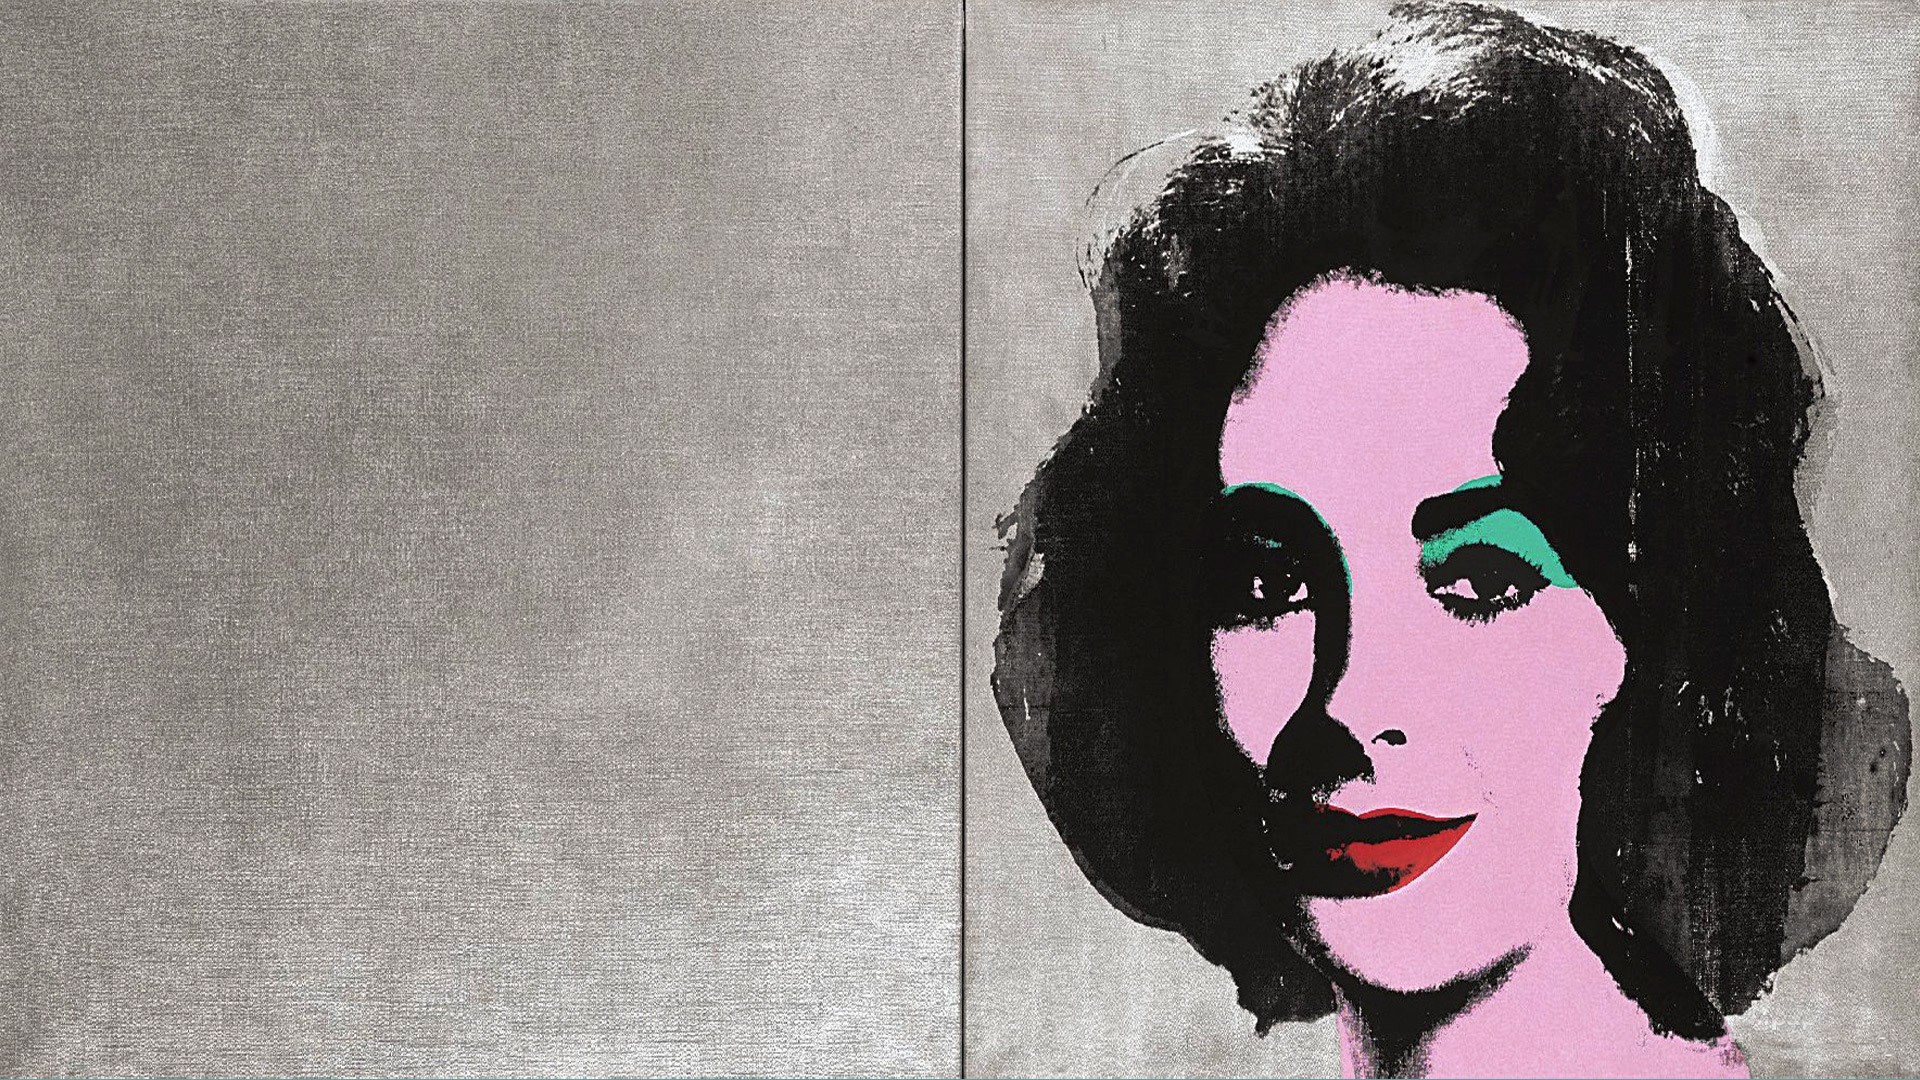 Of Andy Warhol Pretty Woman Wallpaper And Image